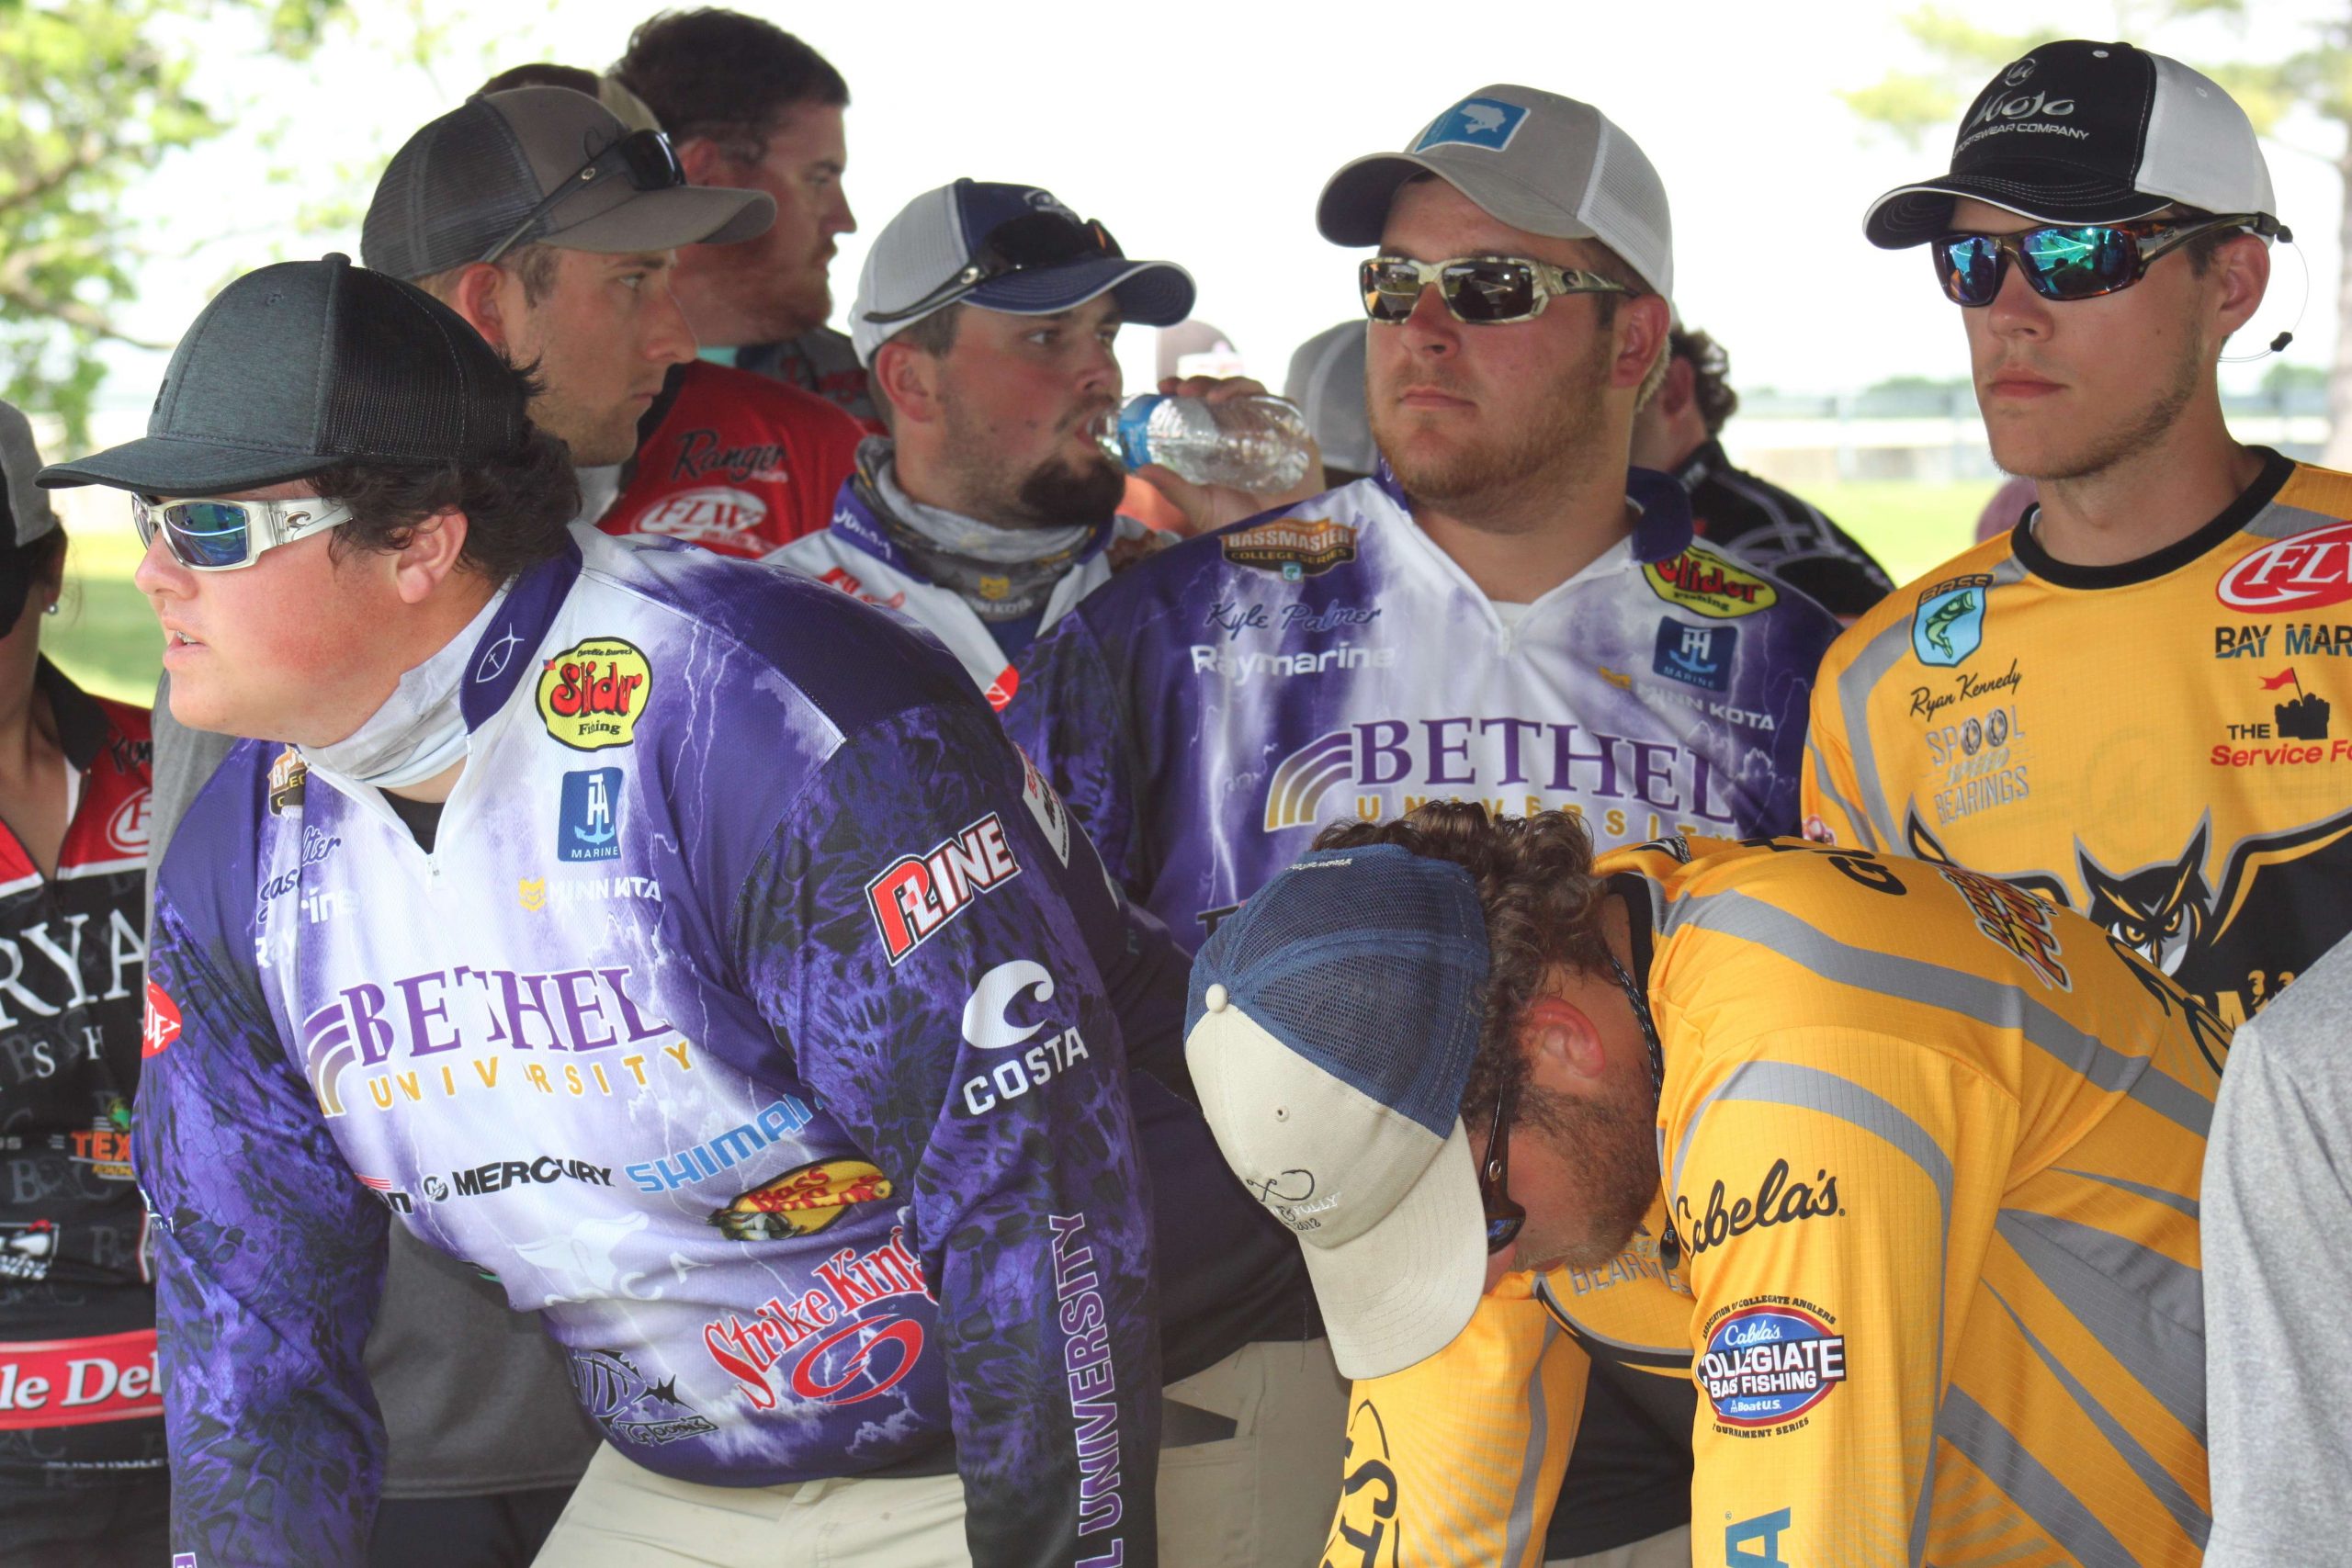 And to the tanks! These guysâ faces say it all. Excitement, determination, anxiousness. Itâs all there for the anglers who give it their all in Bassmaster events.